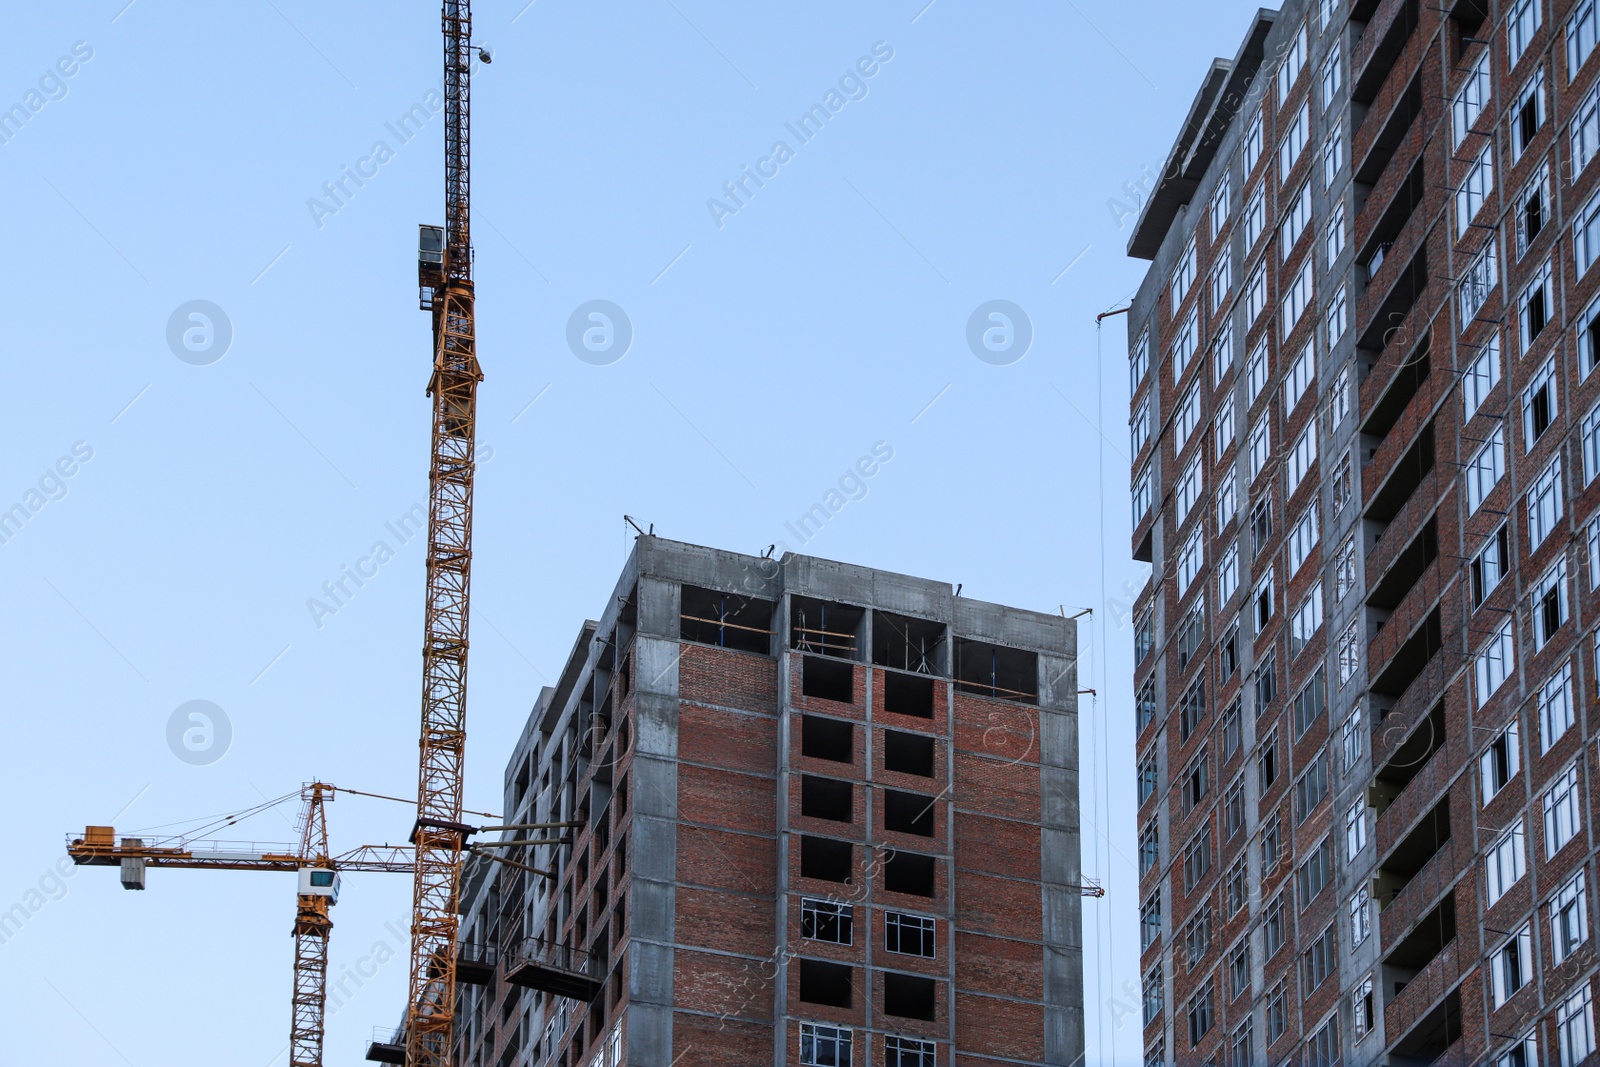 Photo of Construction crane and unfinished building against blue sky